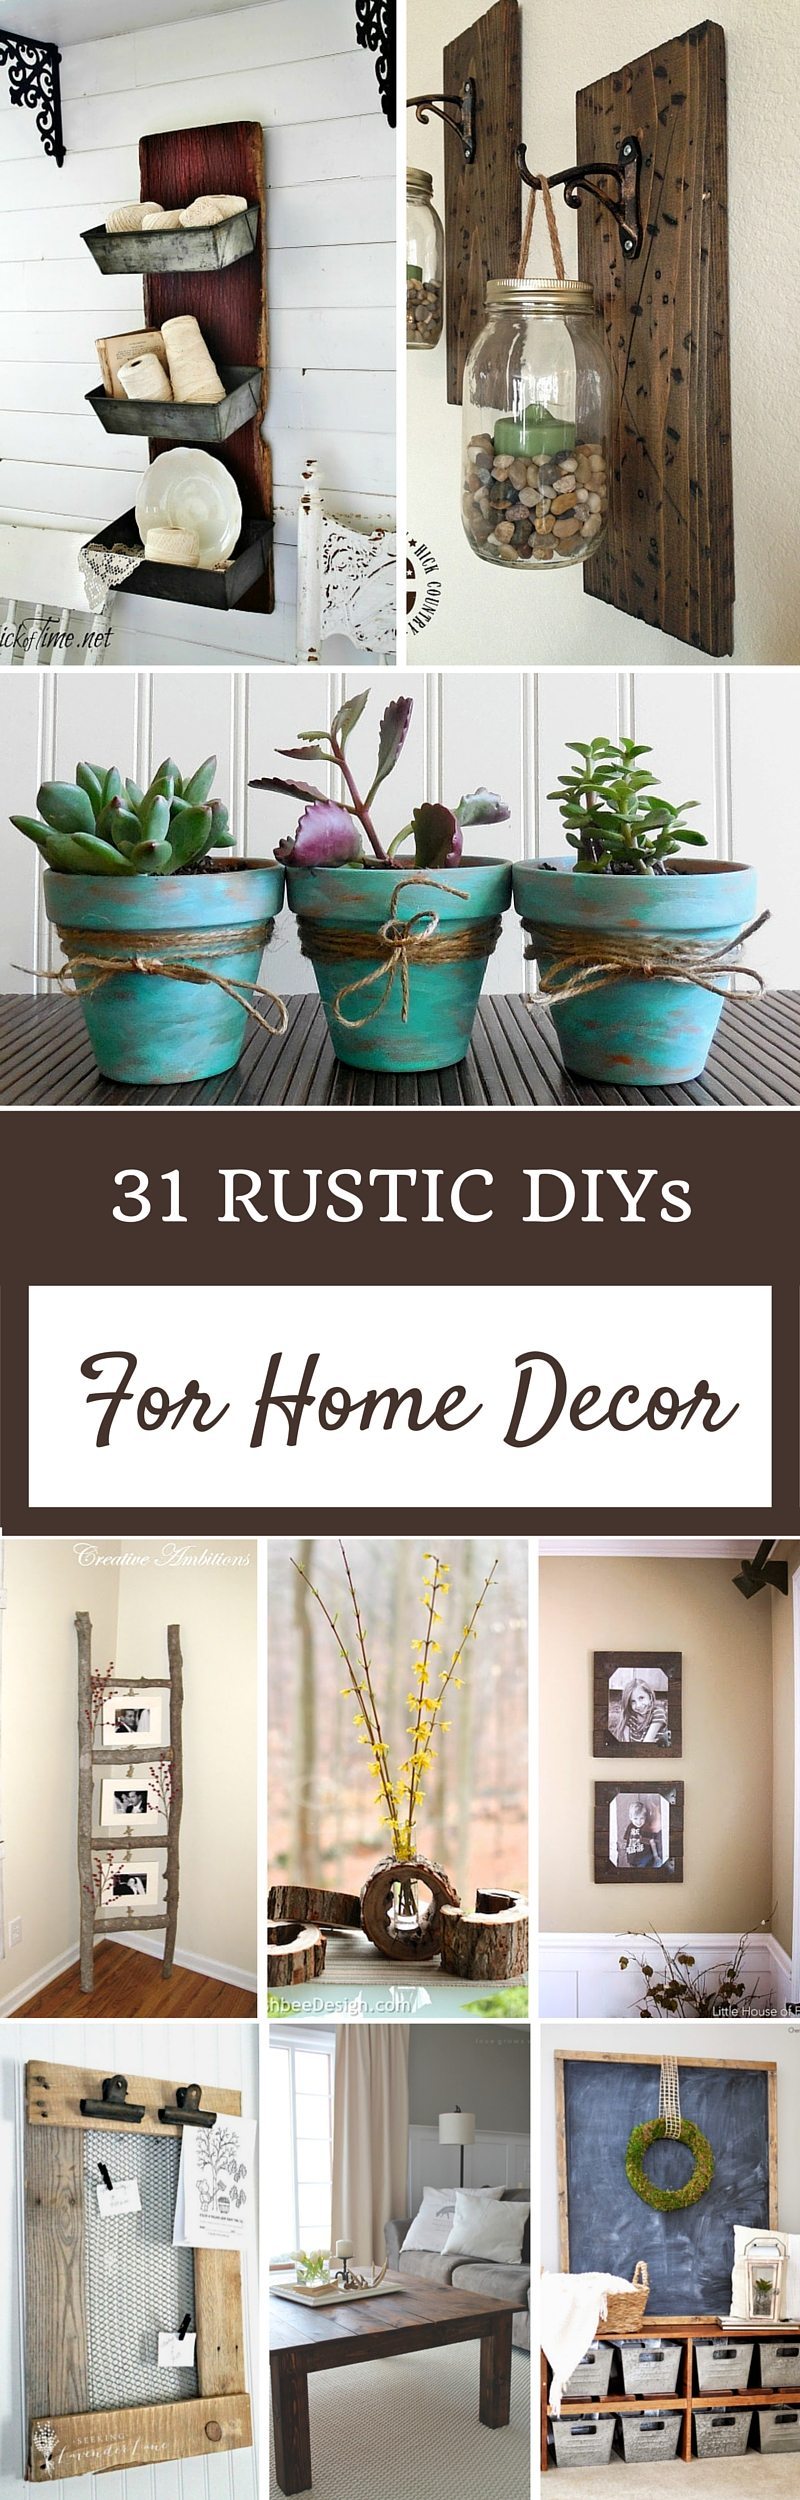 31 Rustic DIY Home Decor Projects | Refresh Restyle